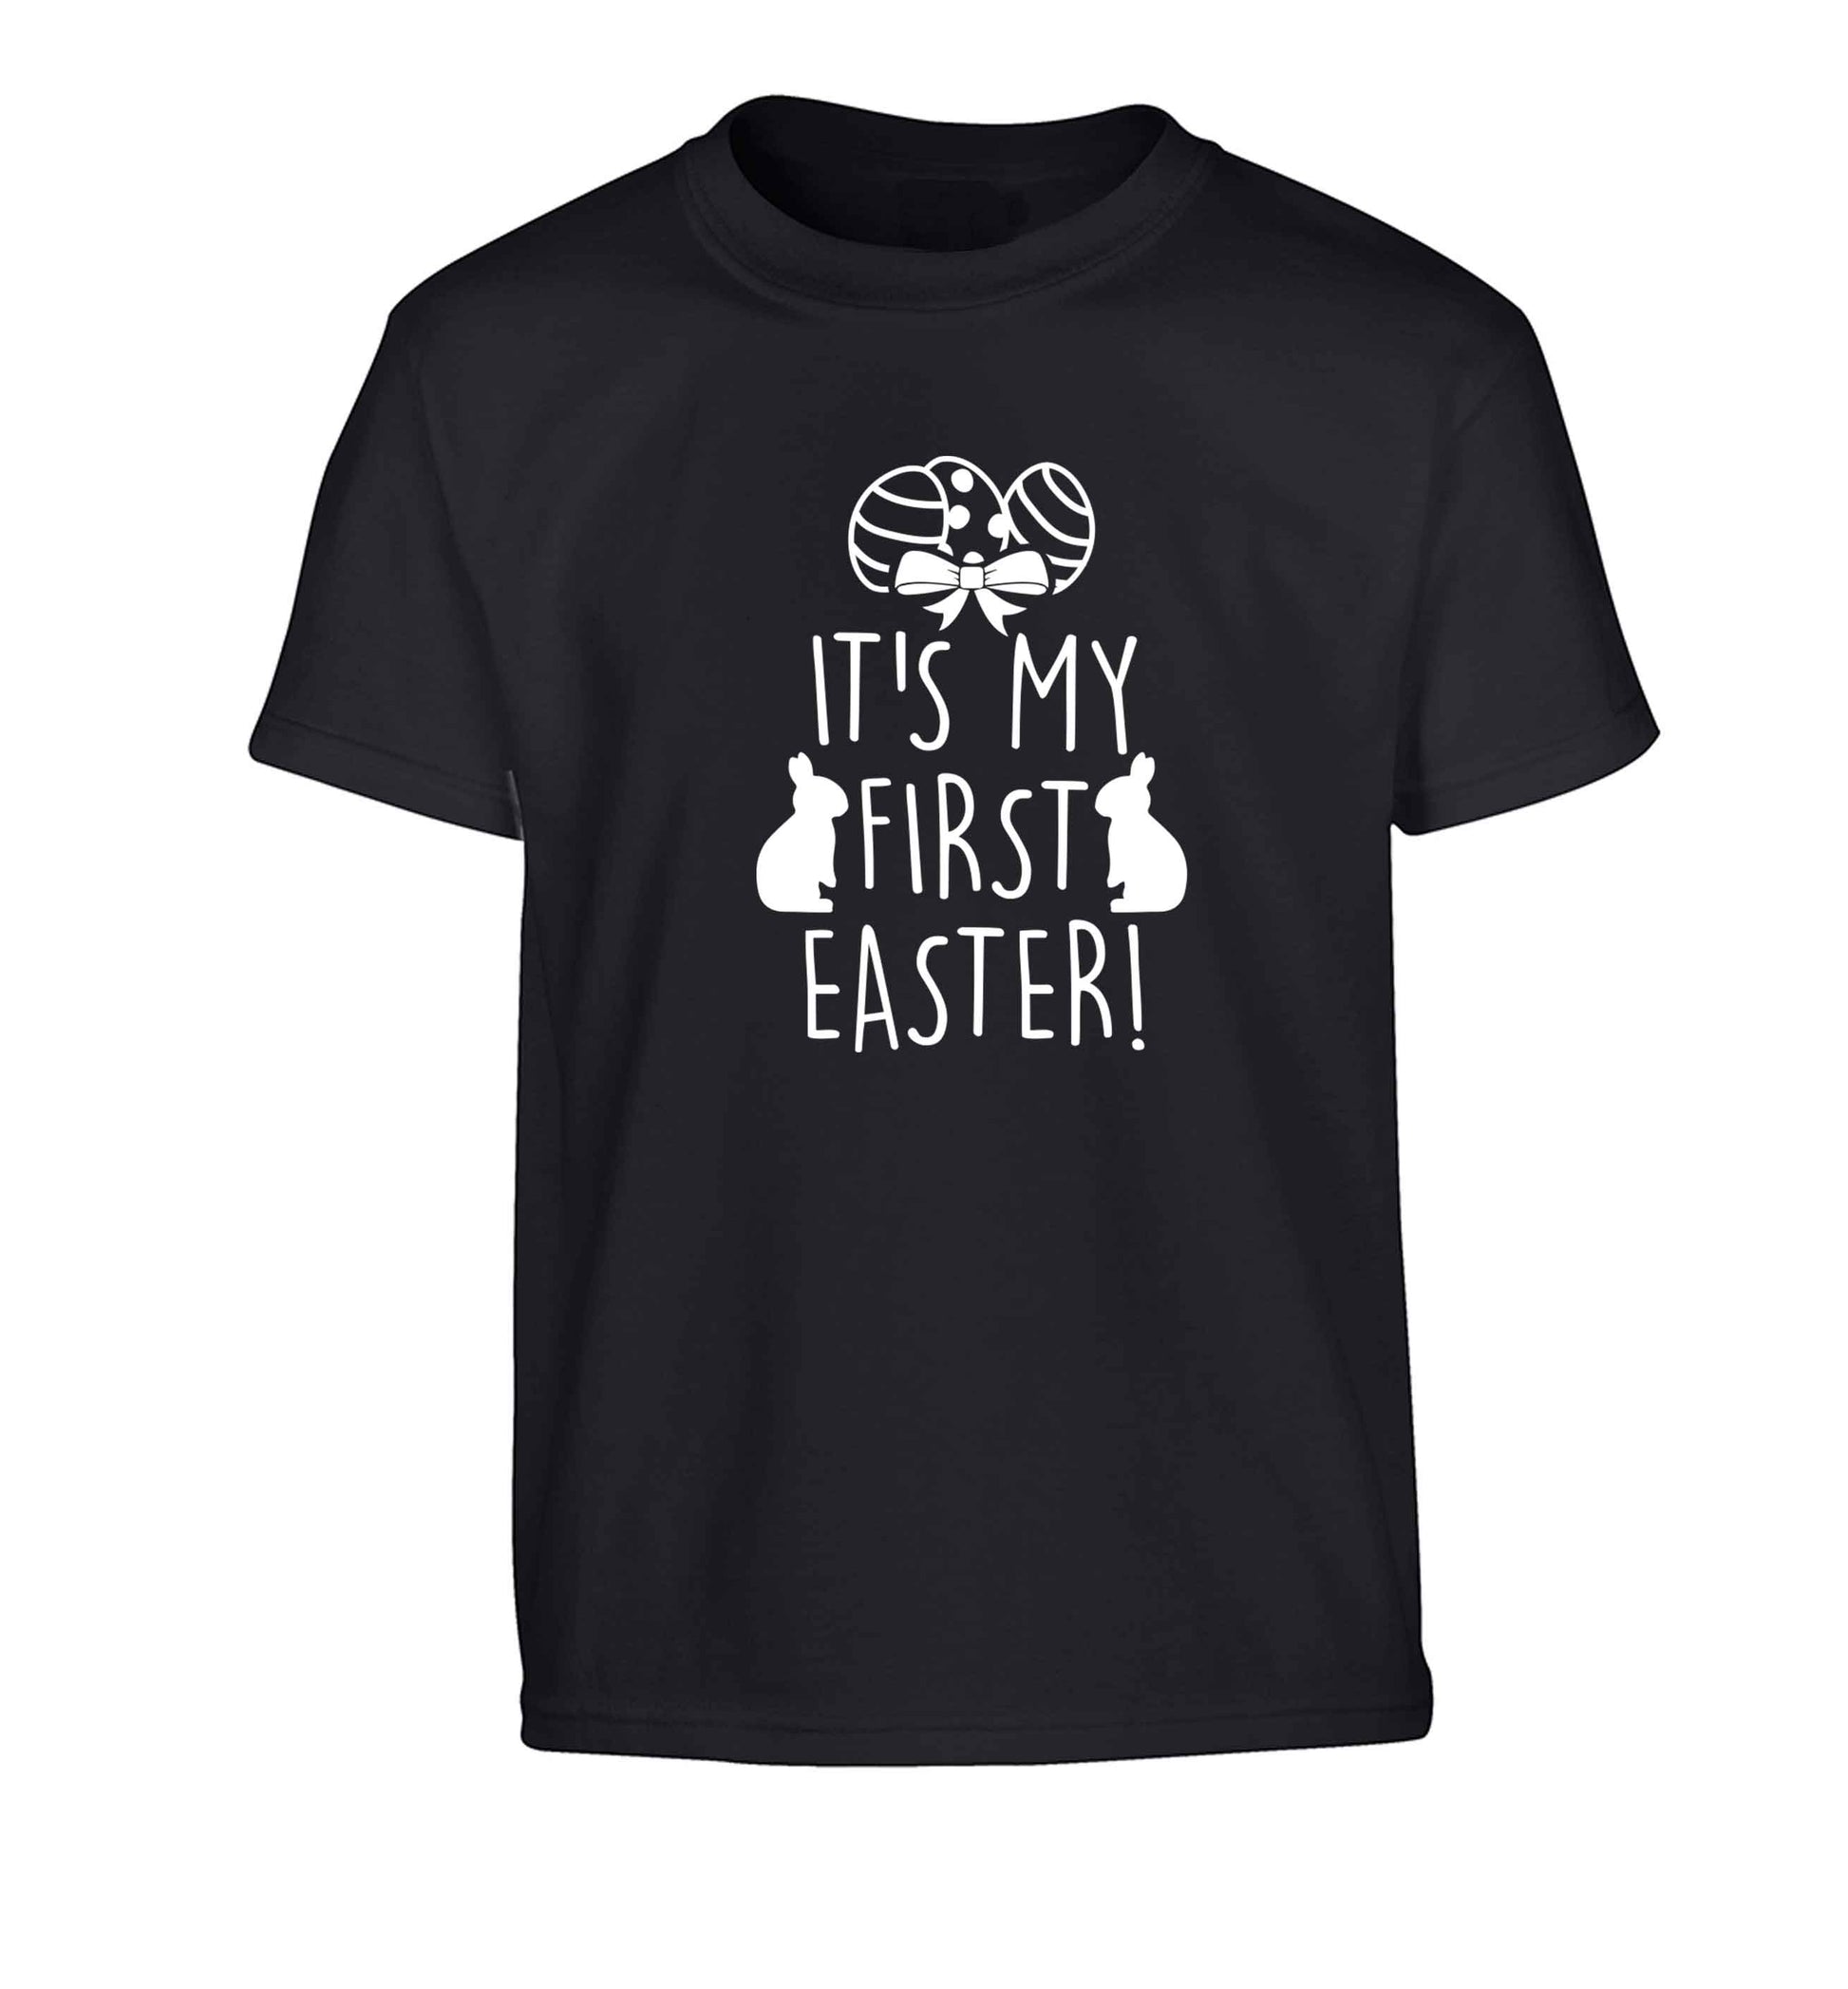 It's my first Easter Children's black Tshirt 12-13 Years